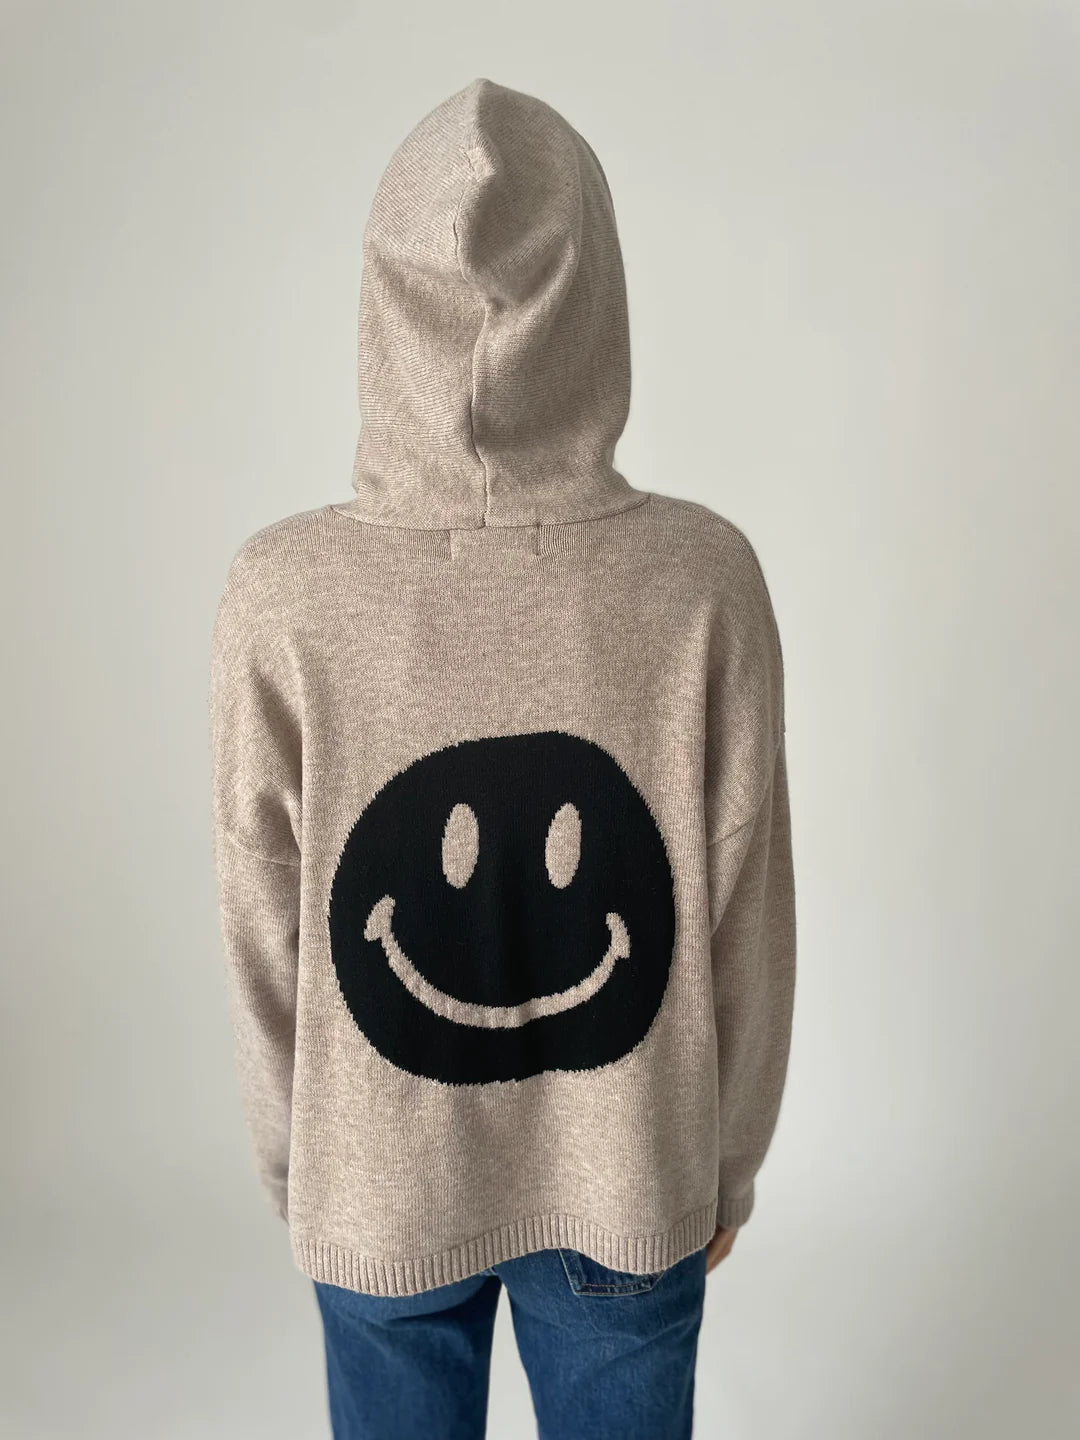 A woman in front of a white background wearing a taupe colored sweater hoodie with a black smiley face on the back of the hoodie. Paired with darker washed denim.